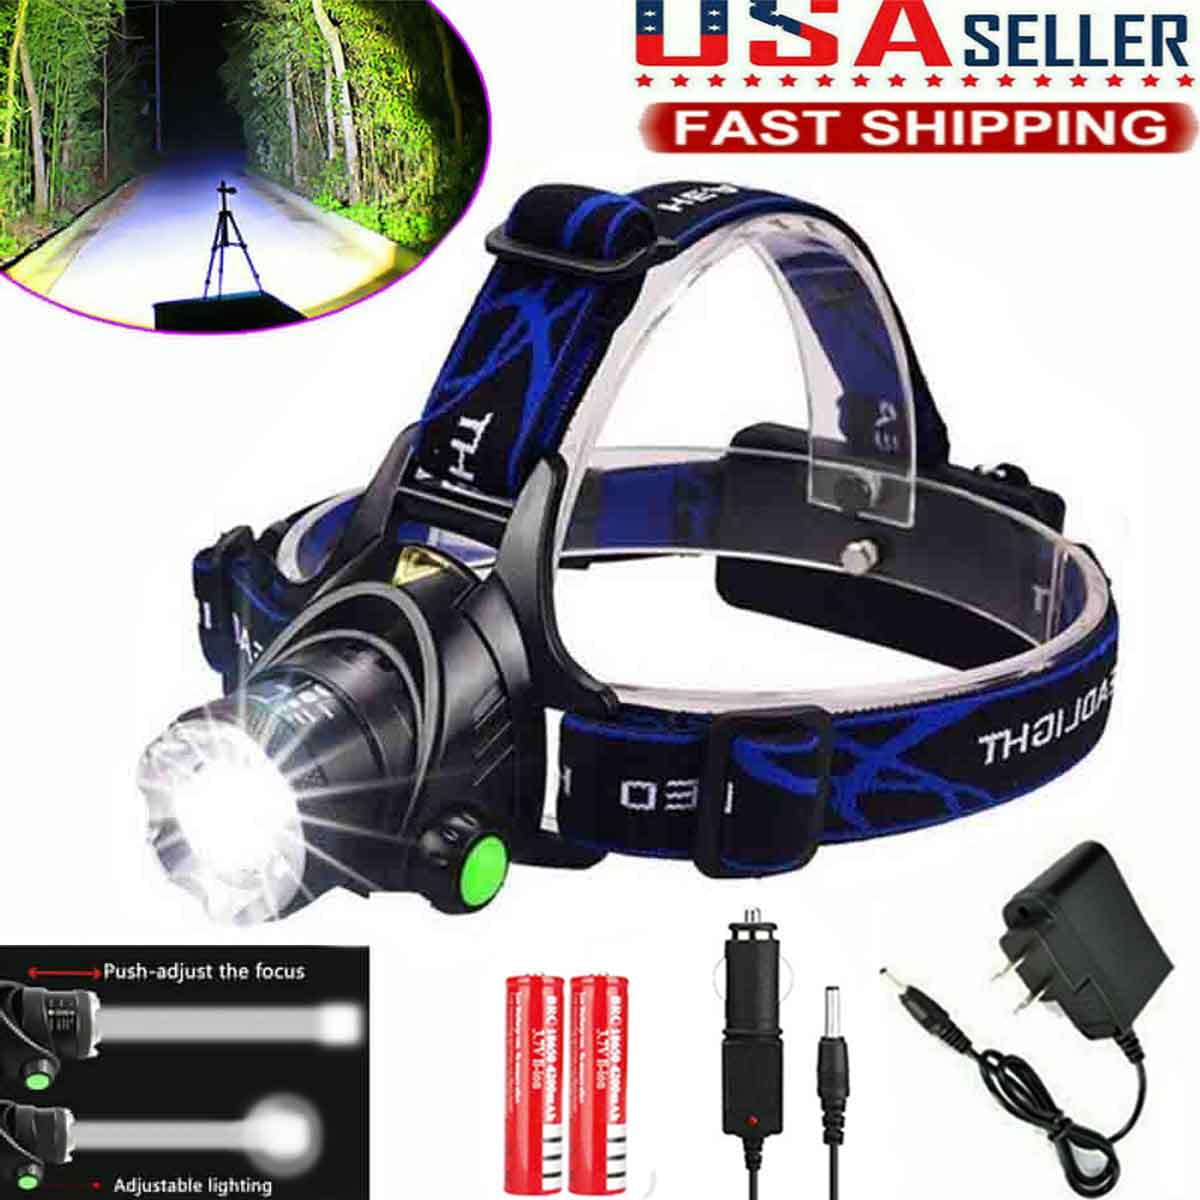 990000LM Powerful T6 LED Headlight Headlamp Rechargeable Head Lamp Torch Zoom 